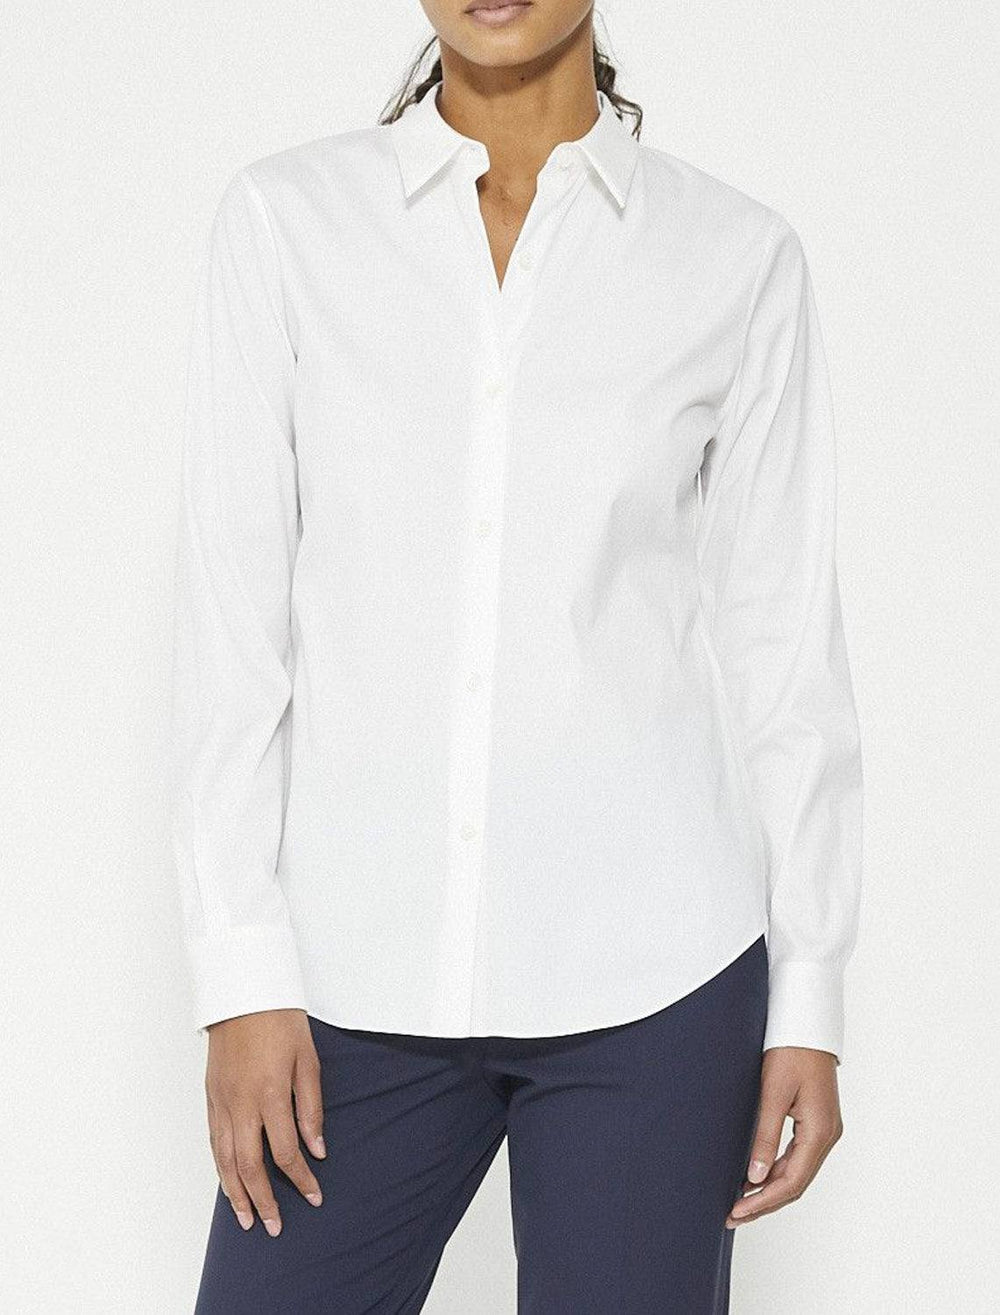 Model wearing Theory's tenia luxe button up shirt in white.